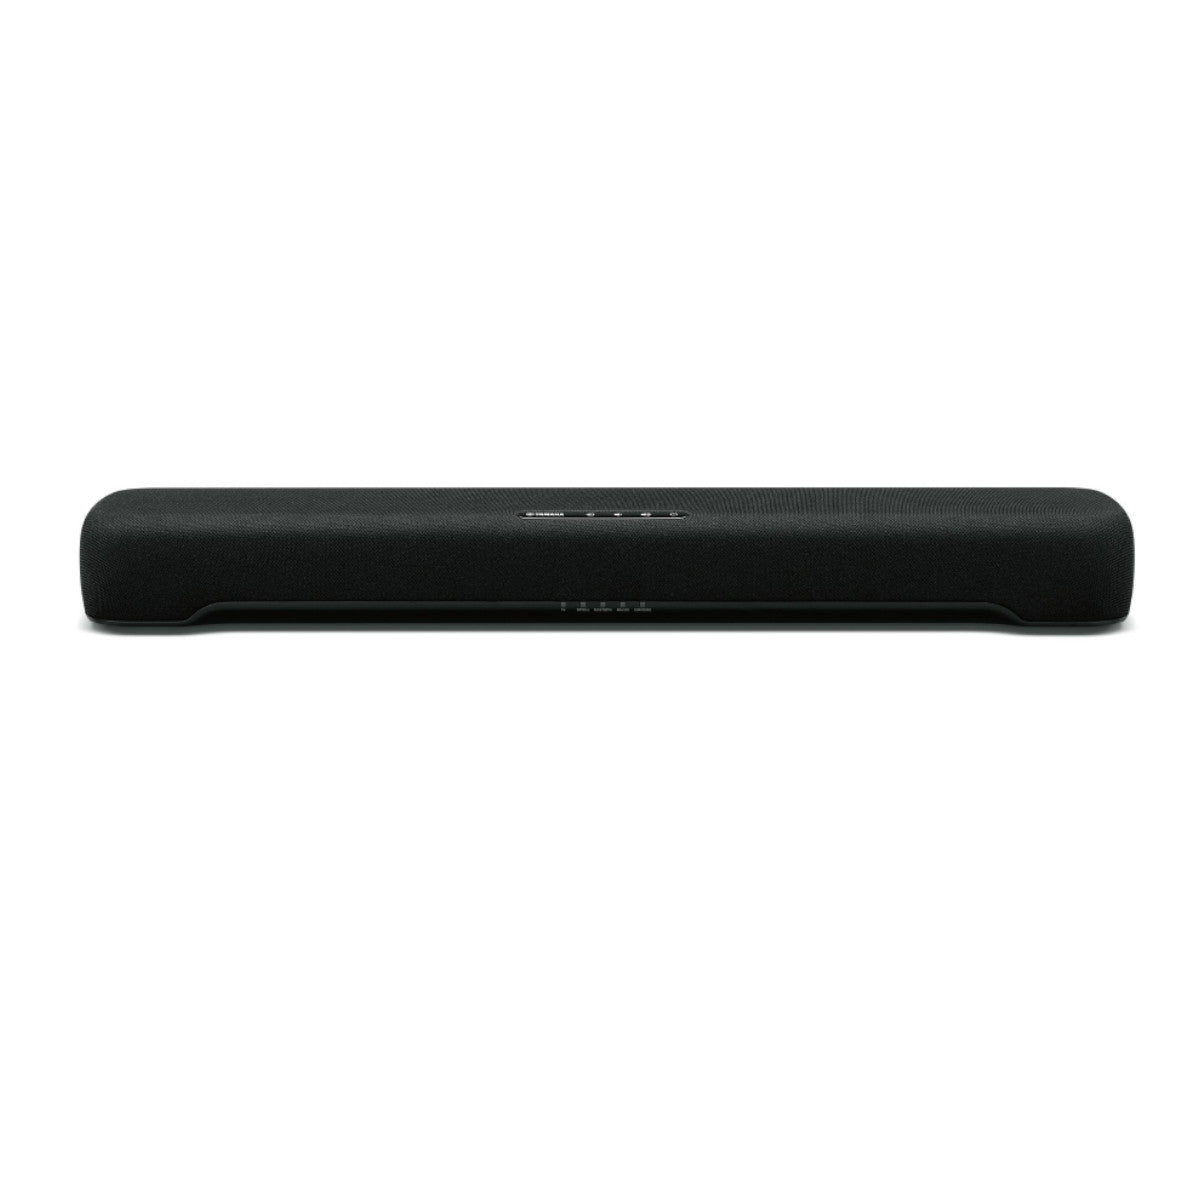 Yamaha SR-C20A Compact Sound Bar With Built-in Subwoofer - Ooberpad India